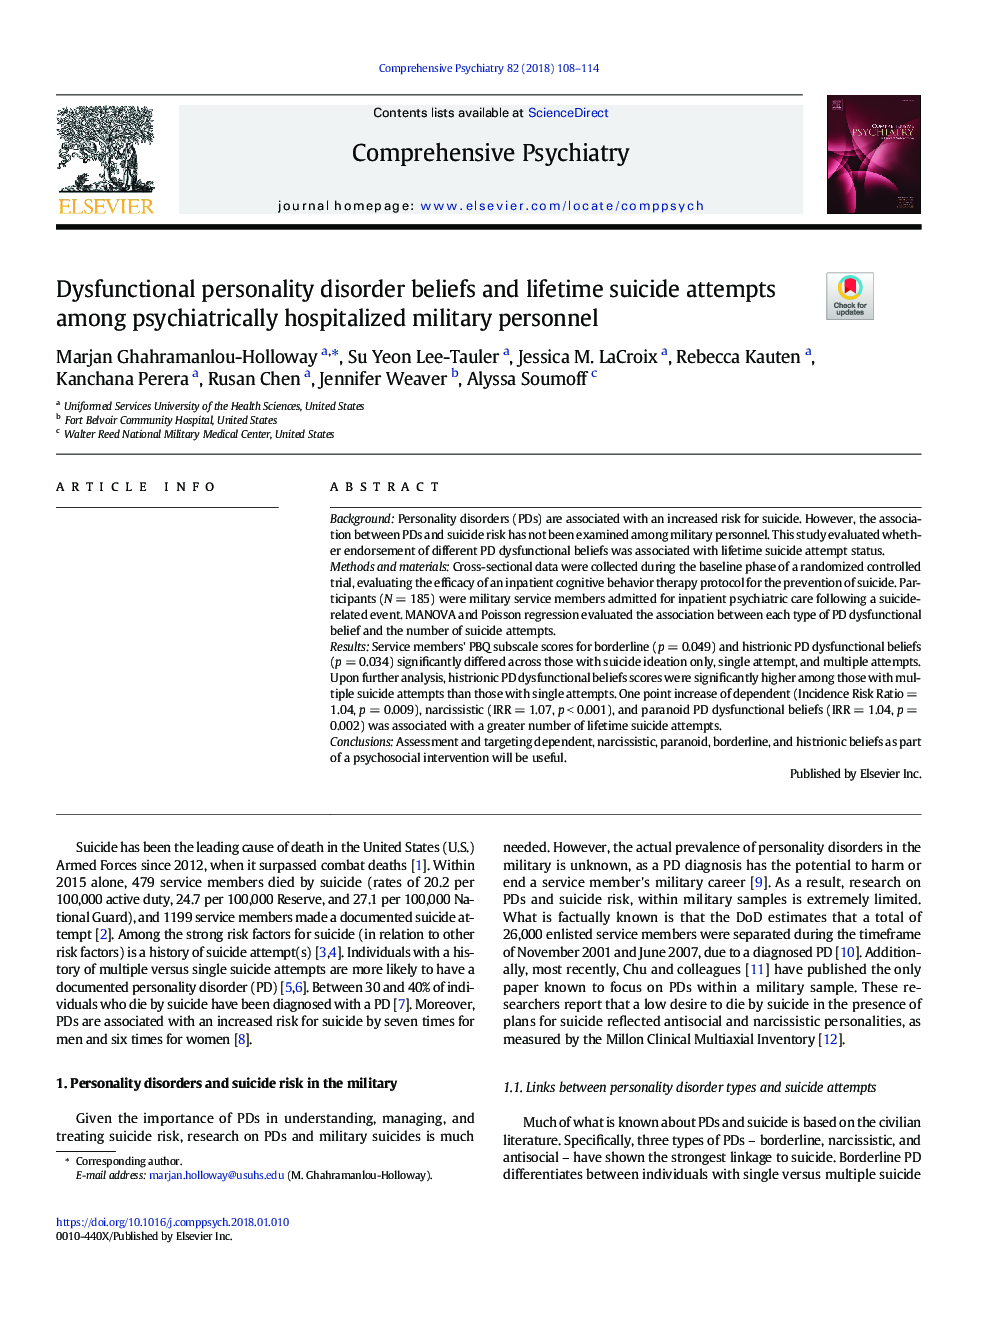 Dysfunctional personality disorder beliefs and lifetime suicide attempts among psychiatrically hospitalized military personnel